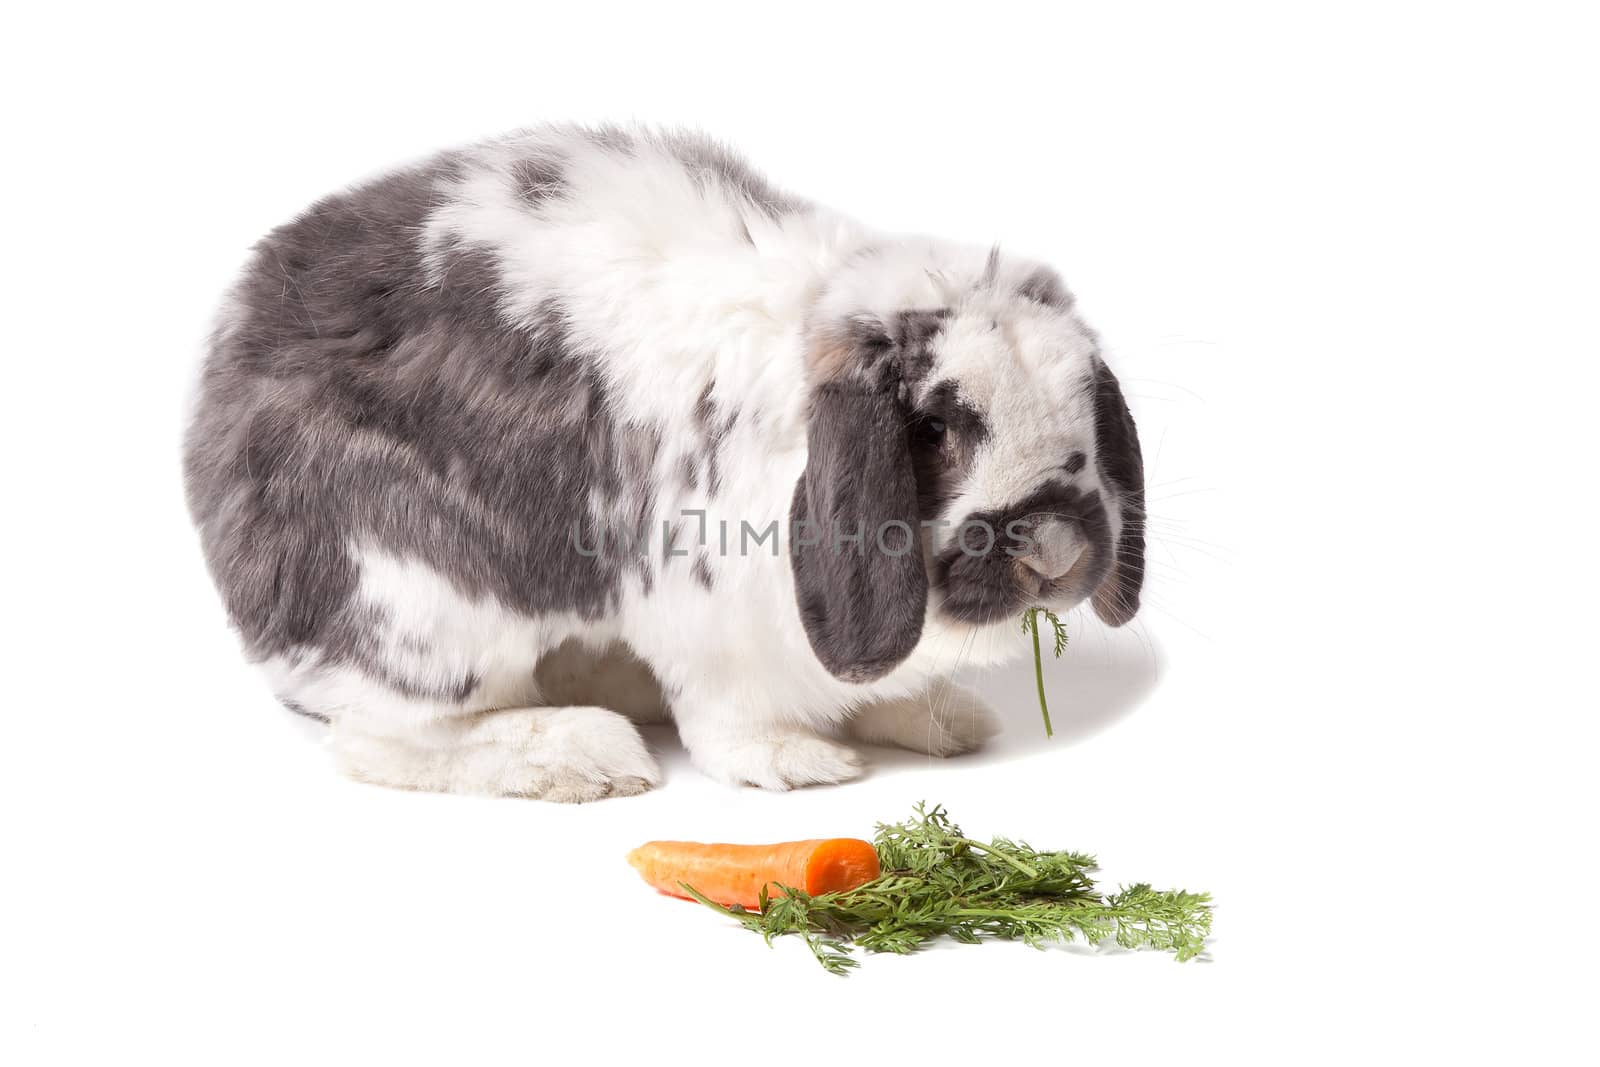 Cute Grey and White Lop Eared Bunny Rabbit Facing Right eating Carrot and Green Vegetables On White Background